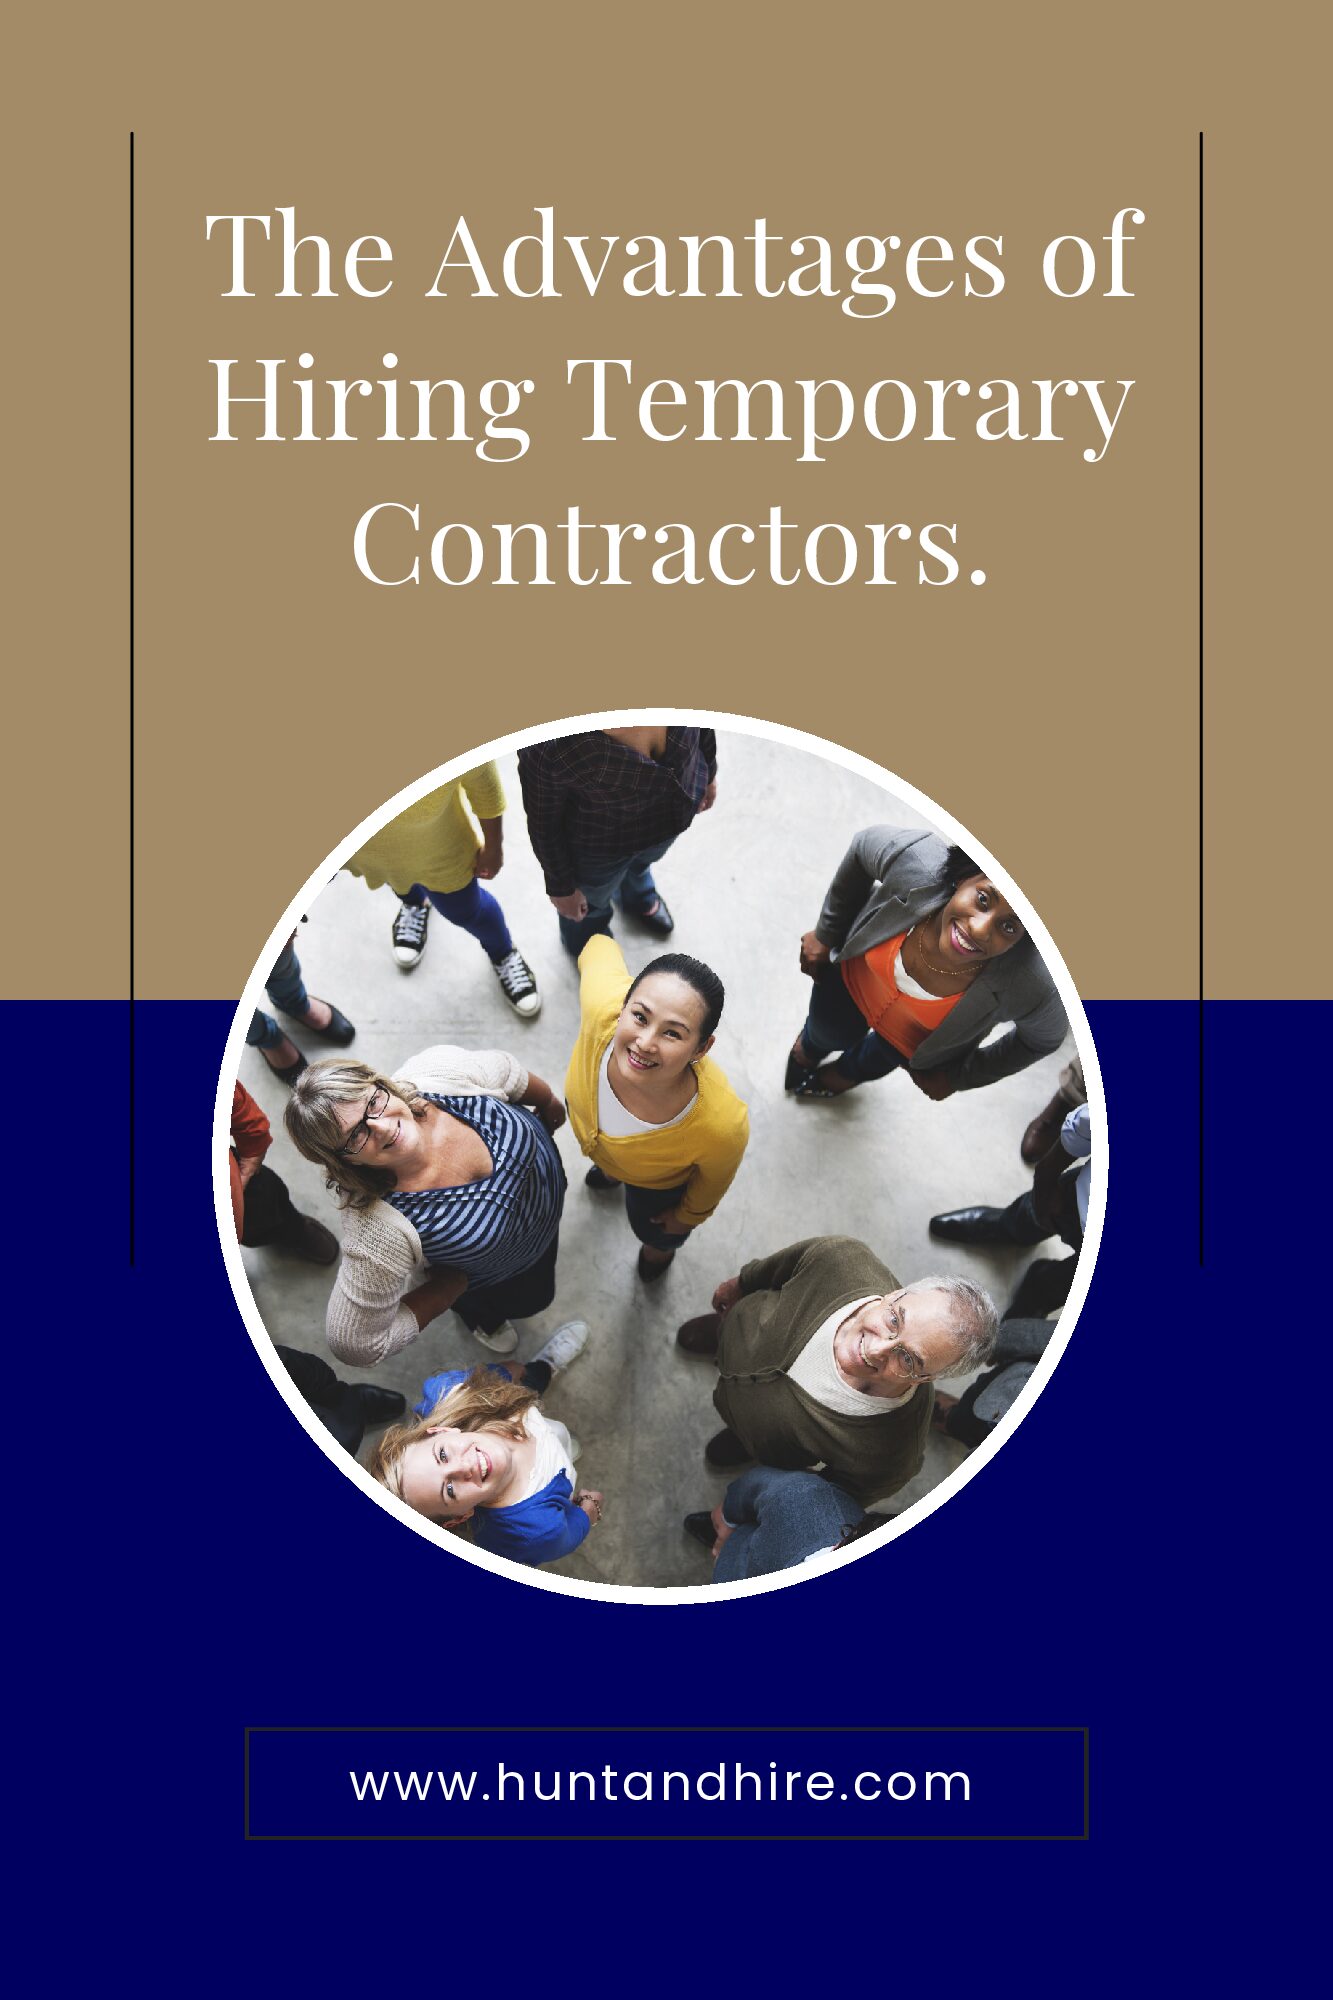 The Advantages of Small Businesses Hiring Temporary Contractors Through Staffing Agencies